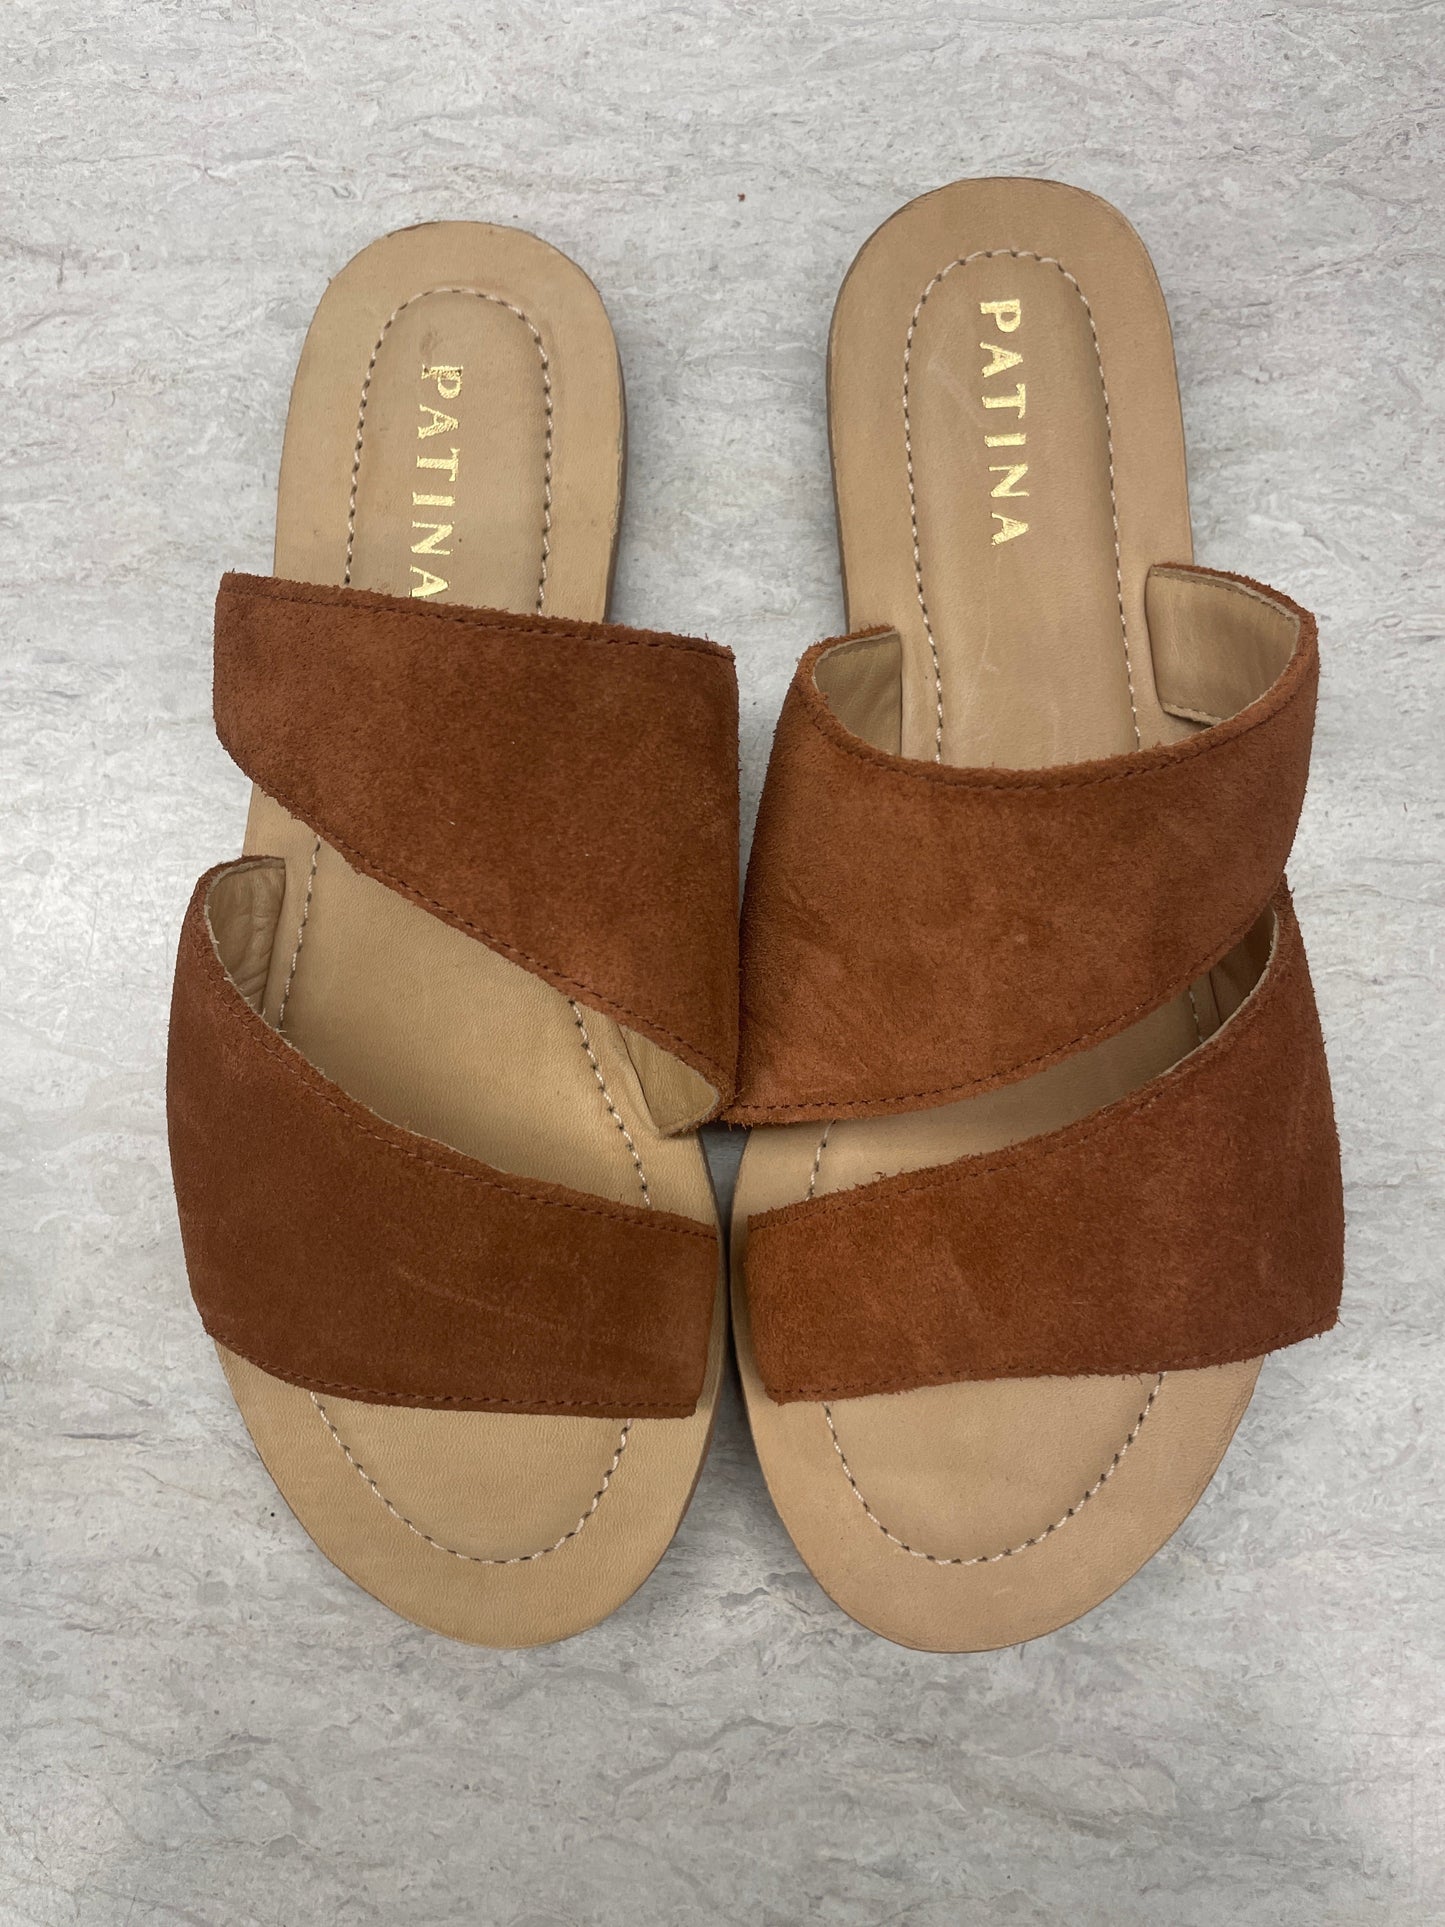 Sandals Flats By Cmb  Size: 7.5